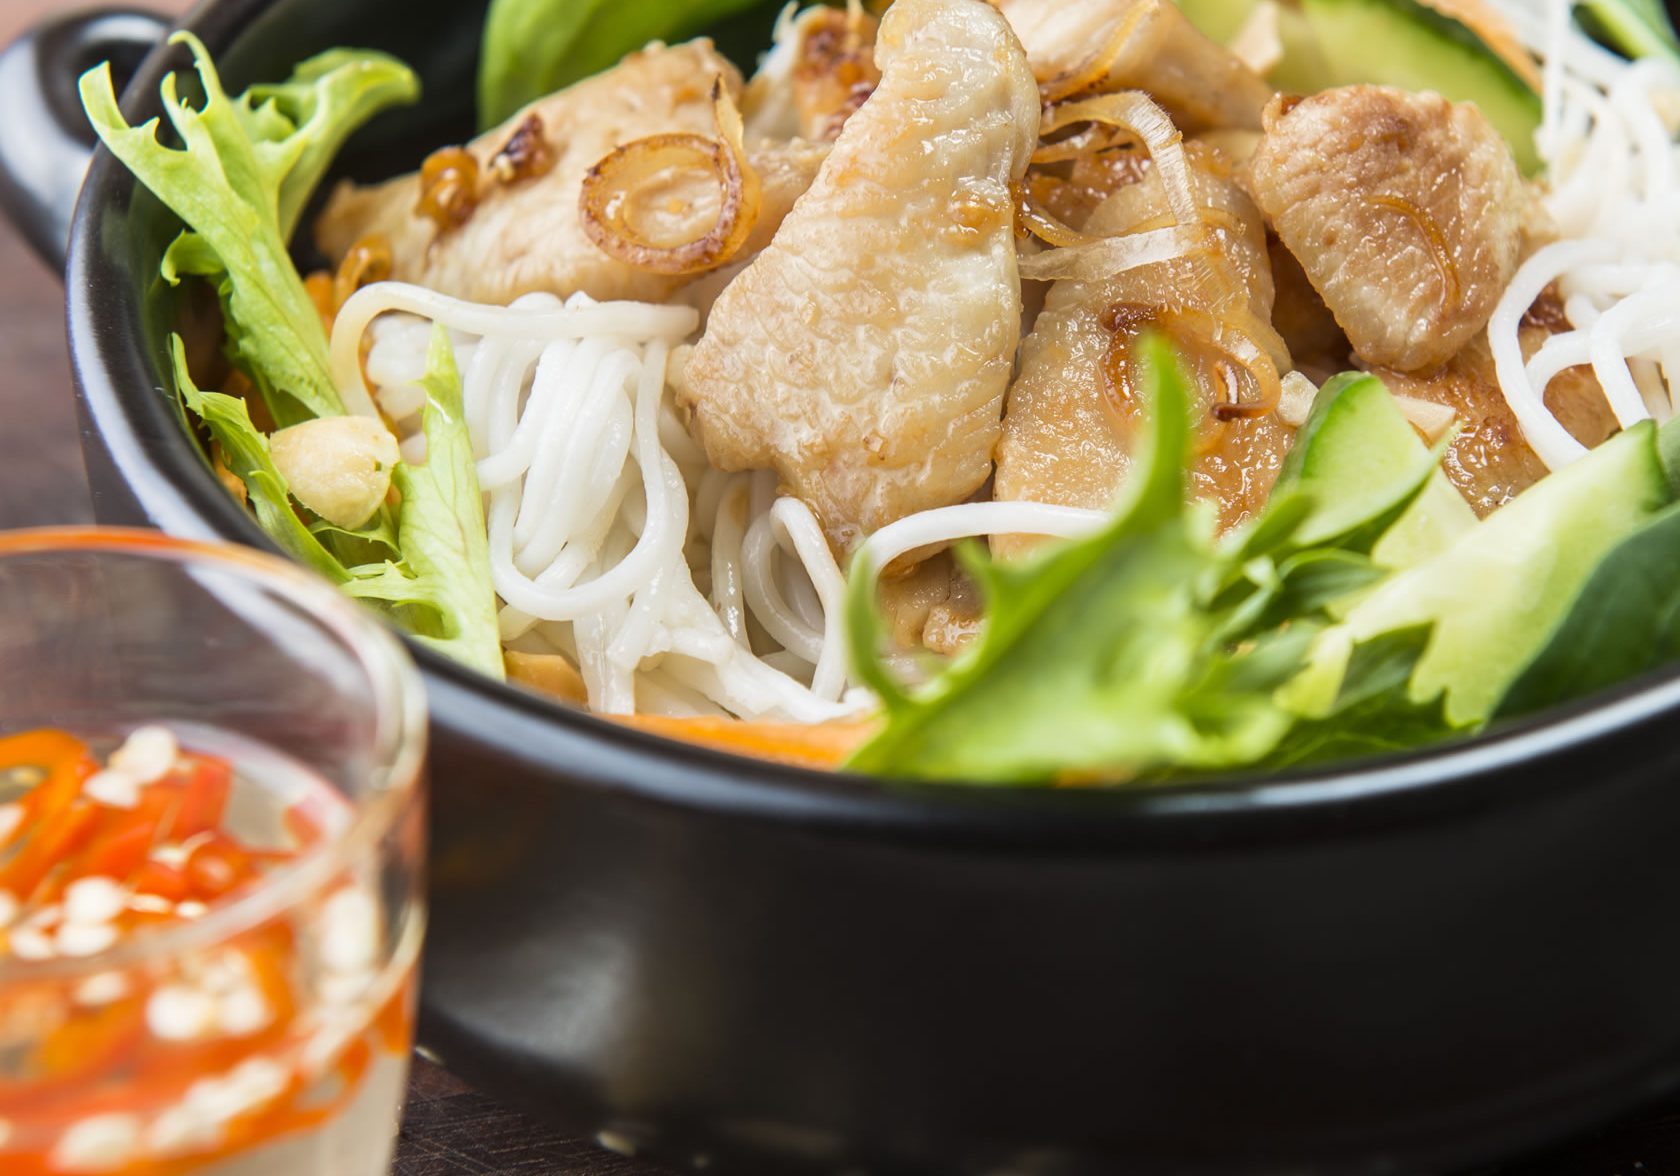 Lemon Grass Chicken Salad with Chilli Dipping Sauce and Somen Noodles